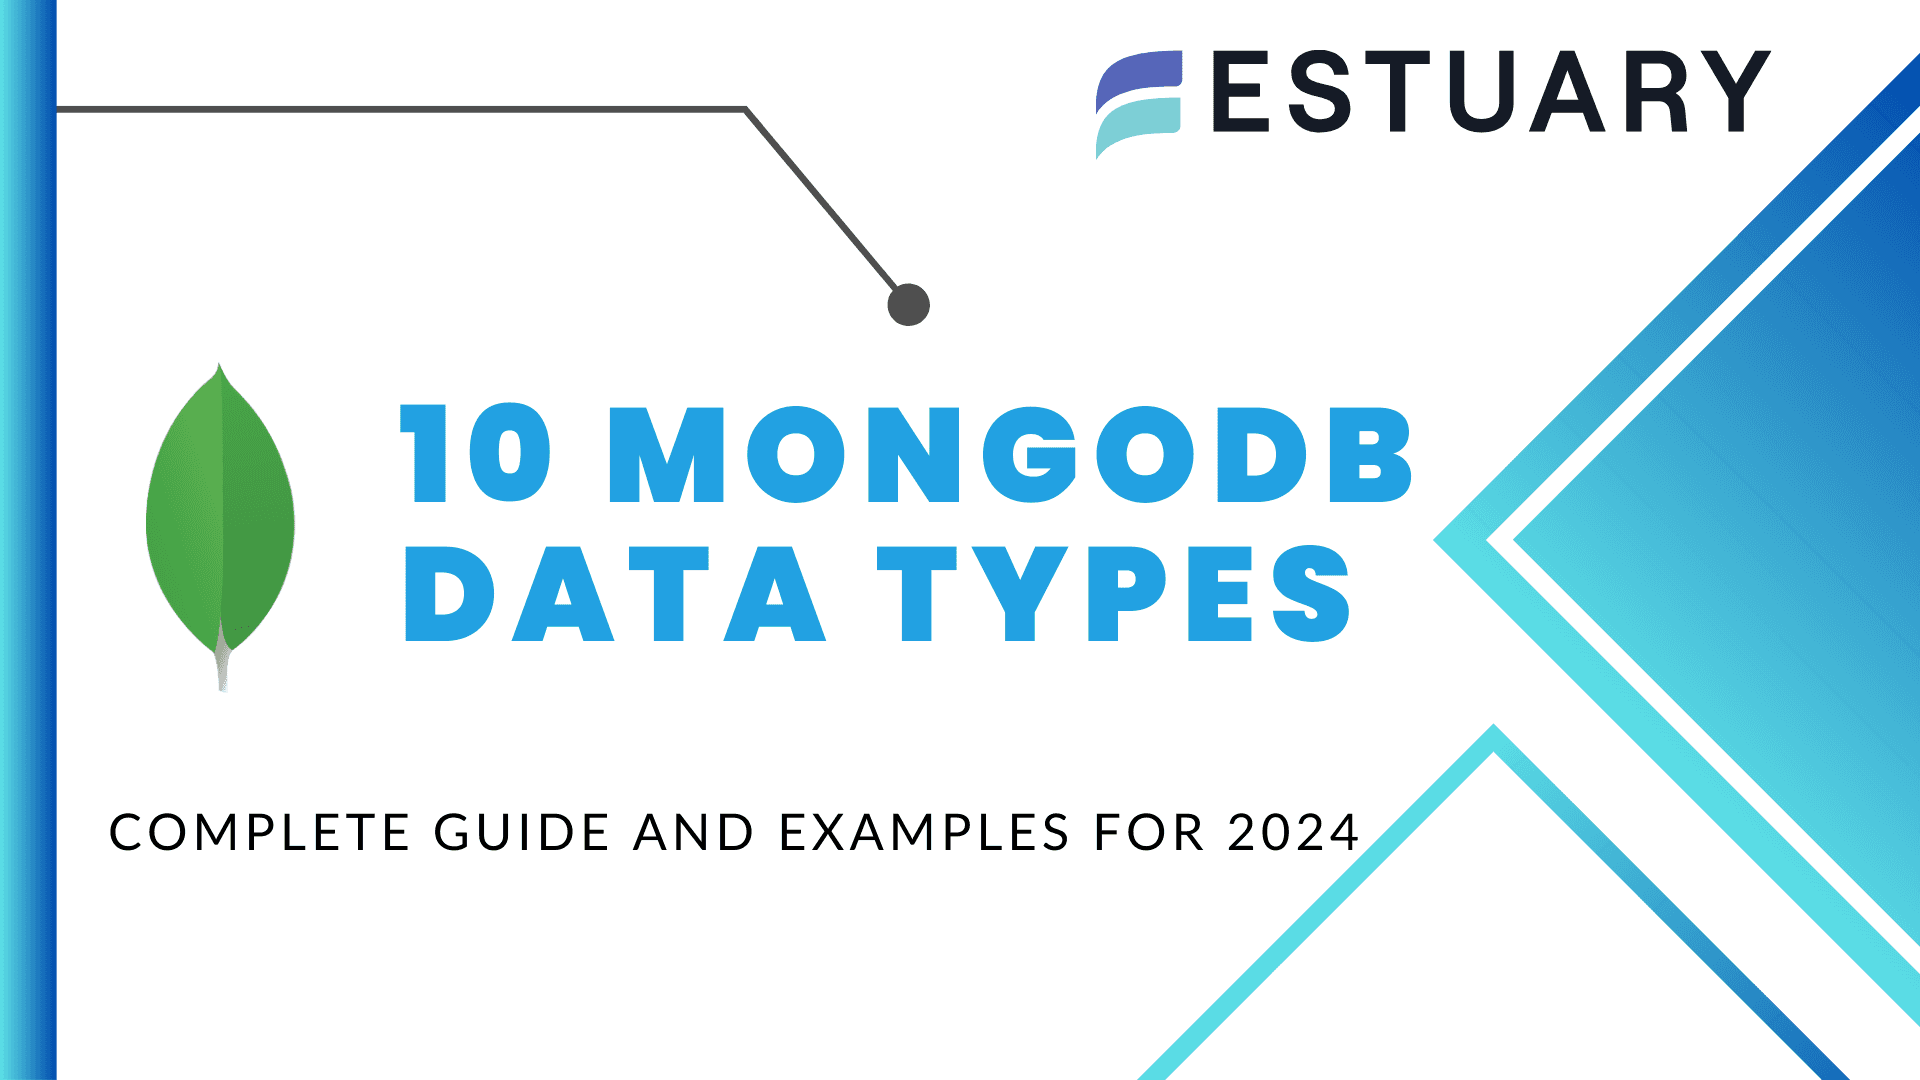 10 MongoDB Data Types: Complete Guide + Examples For 2024